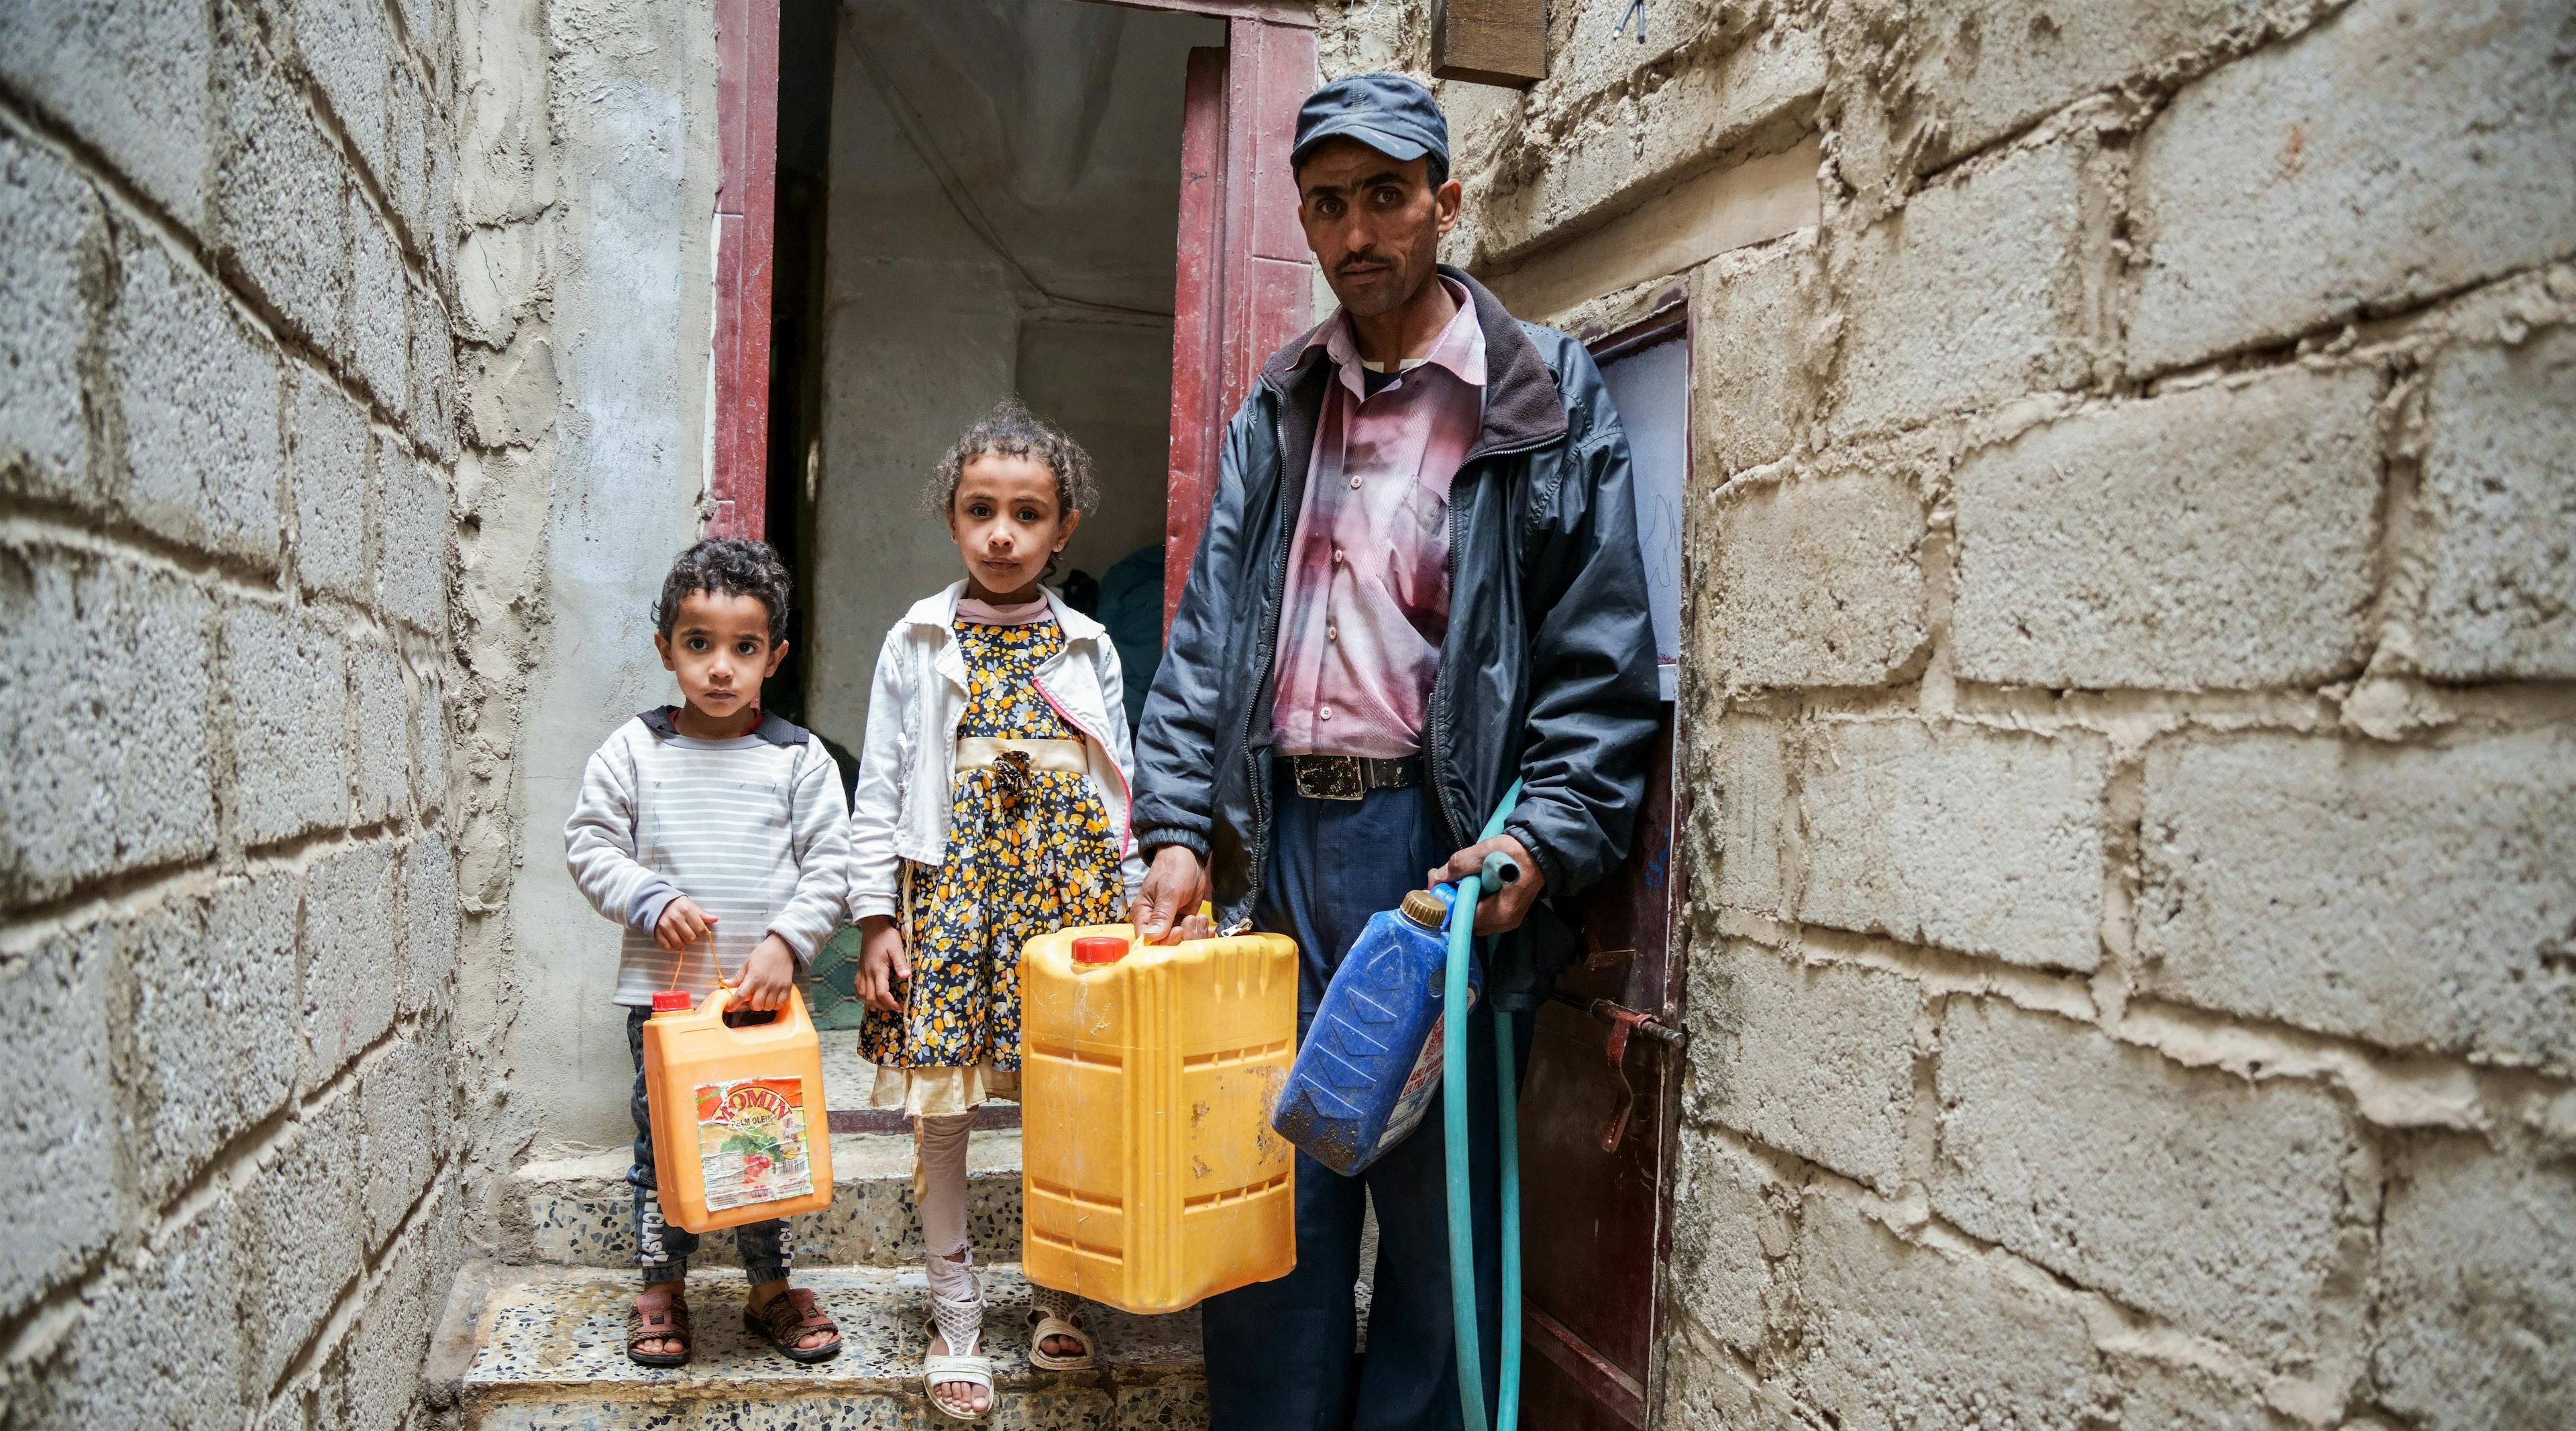 Nabil takes his children, Mayar, and Mohammed, to fetch water from a nearby charity tank in Dhamar Governorate, Yemen. This UNICEF-supported solar powered water project has provided clean water for 137,000 people including schools, health centres and vulnerable communities. This project is one of 150 solar powered water projects across Yemen, reaching 2.5 million people.